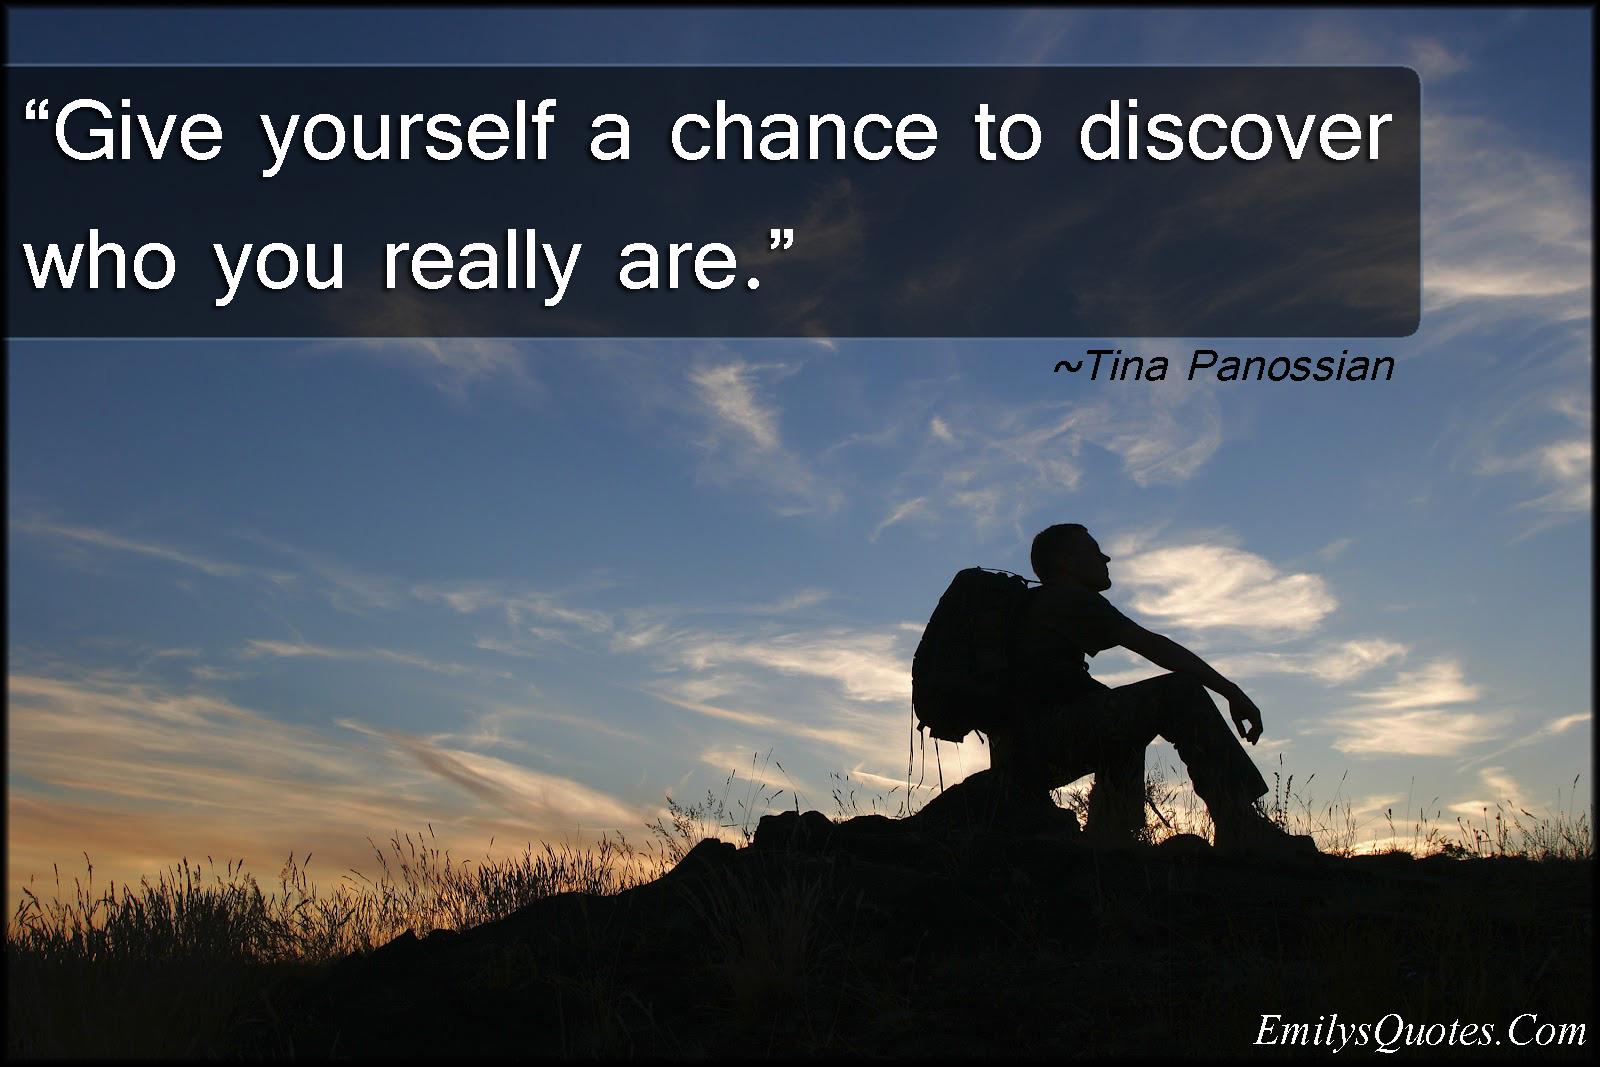 Give yourself a chance to discover who you really are